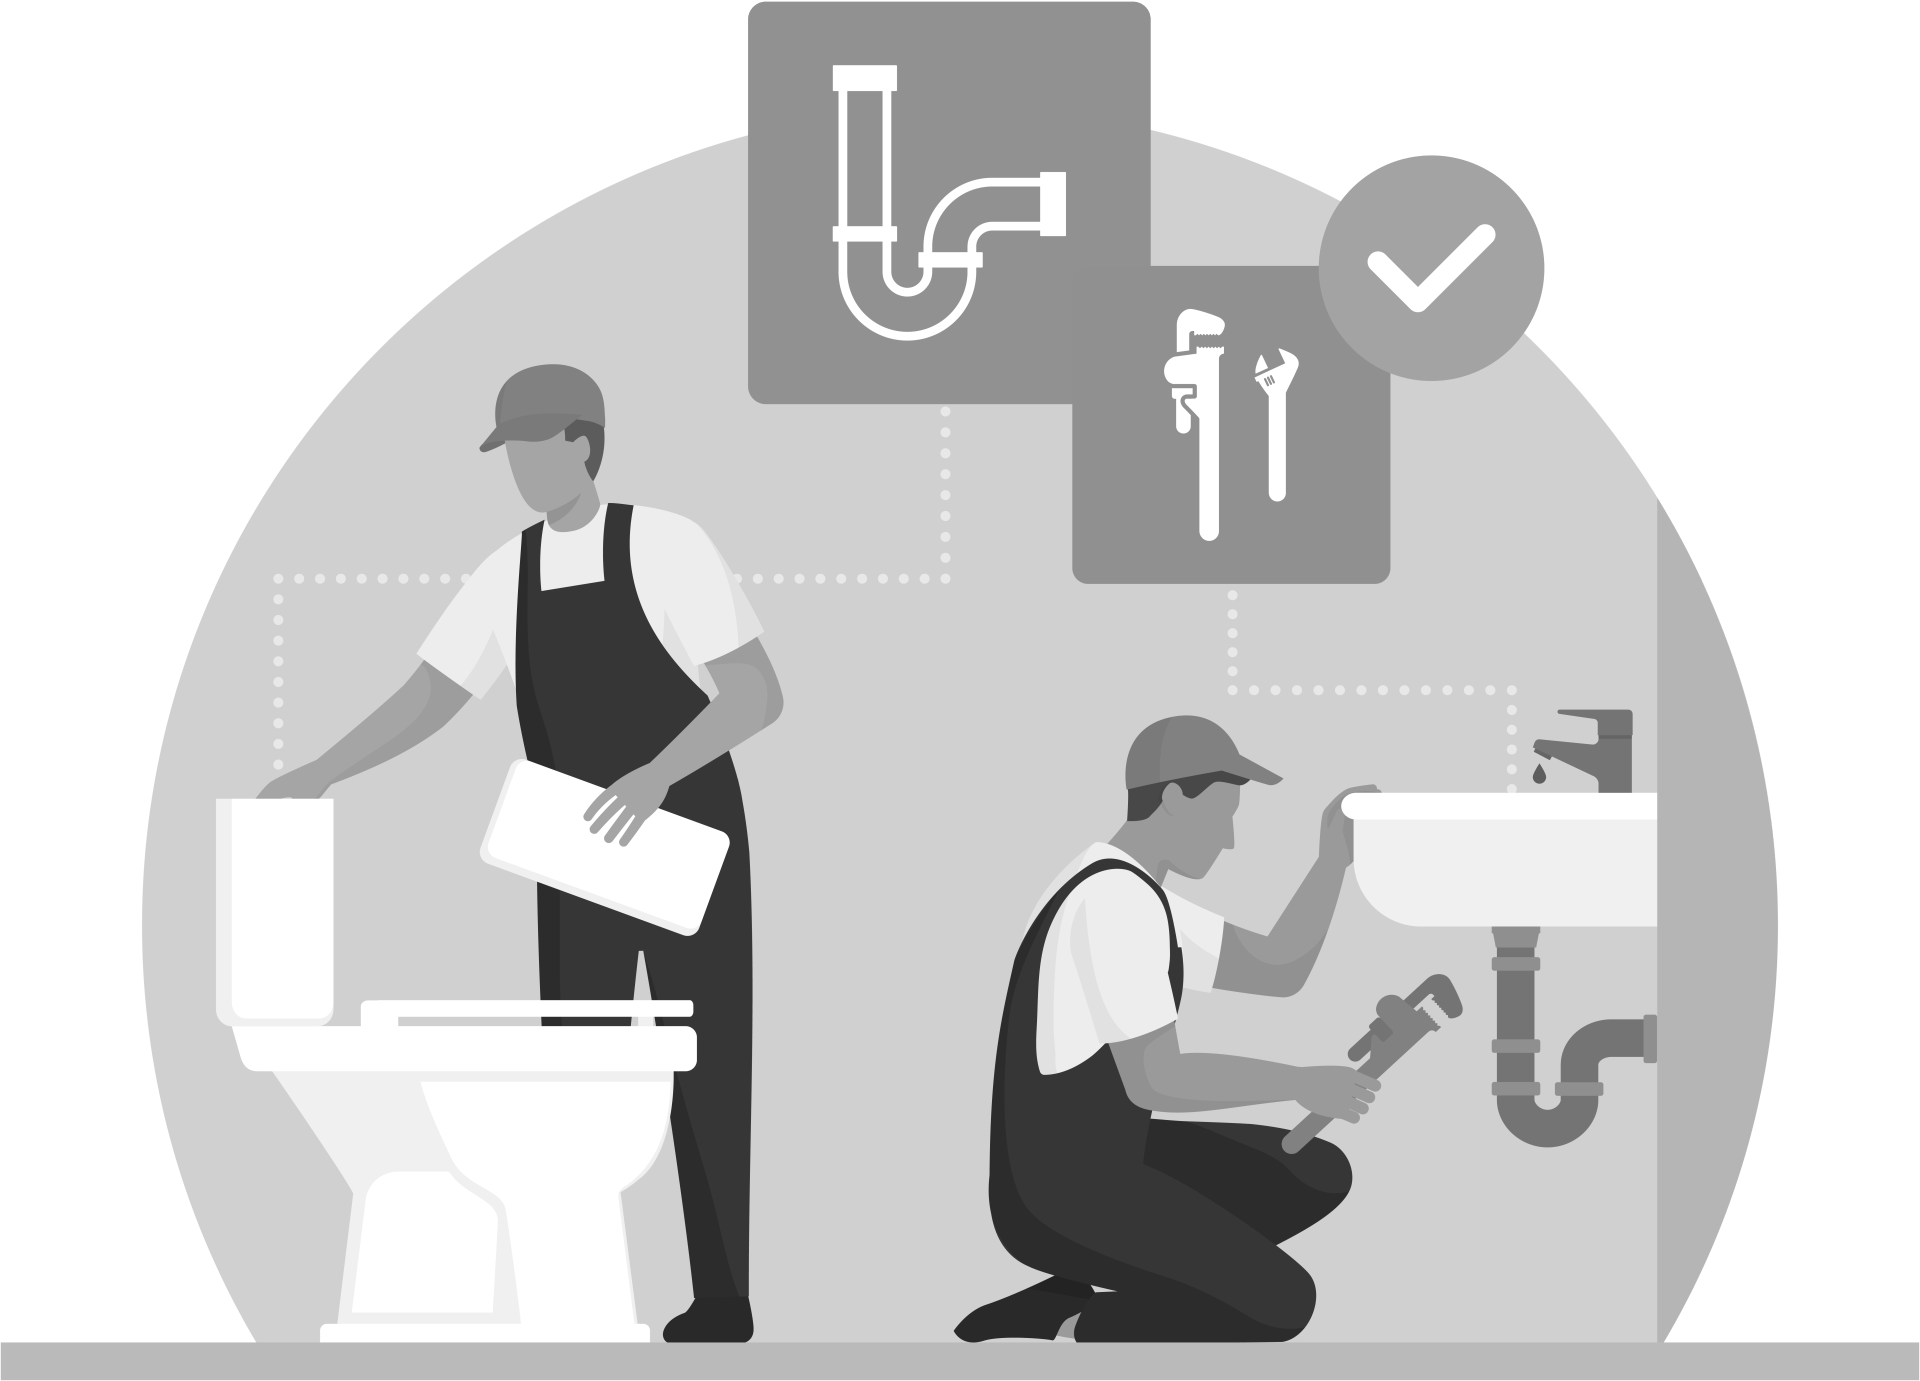 Two Plumber Vector | San Diego, California | Black Frog Plumbing and Drains